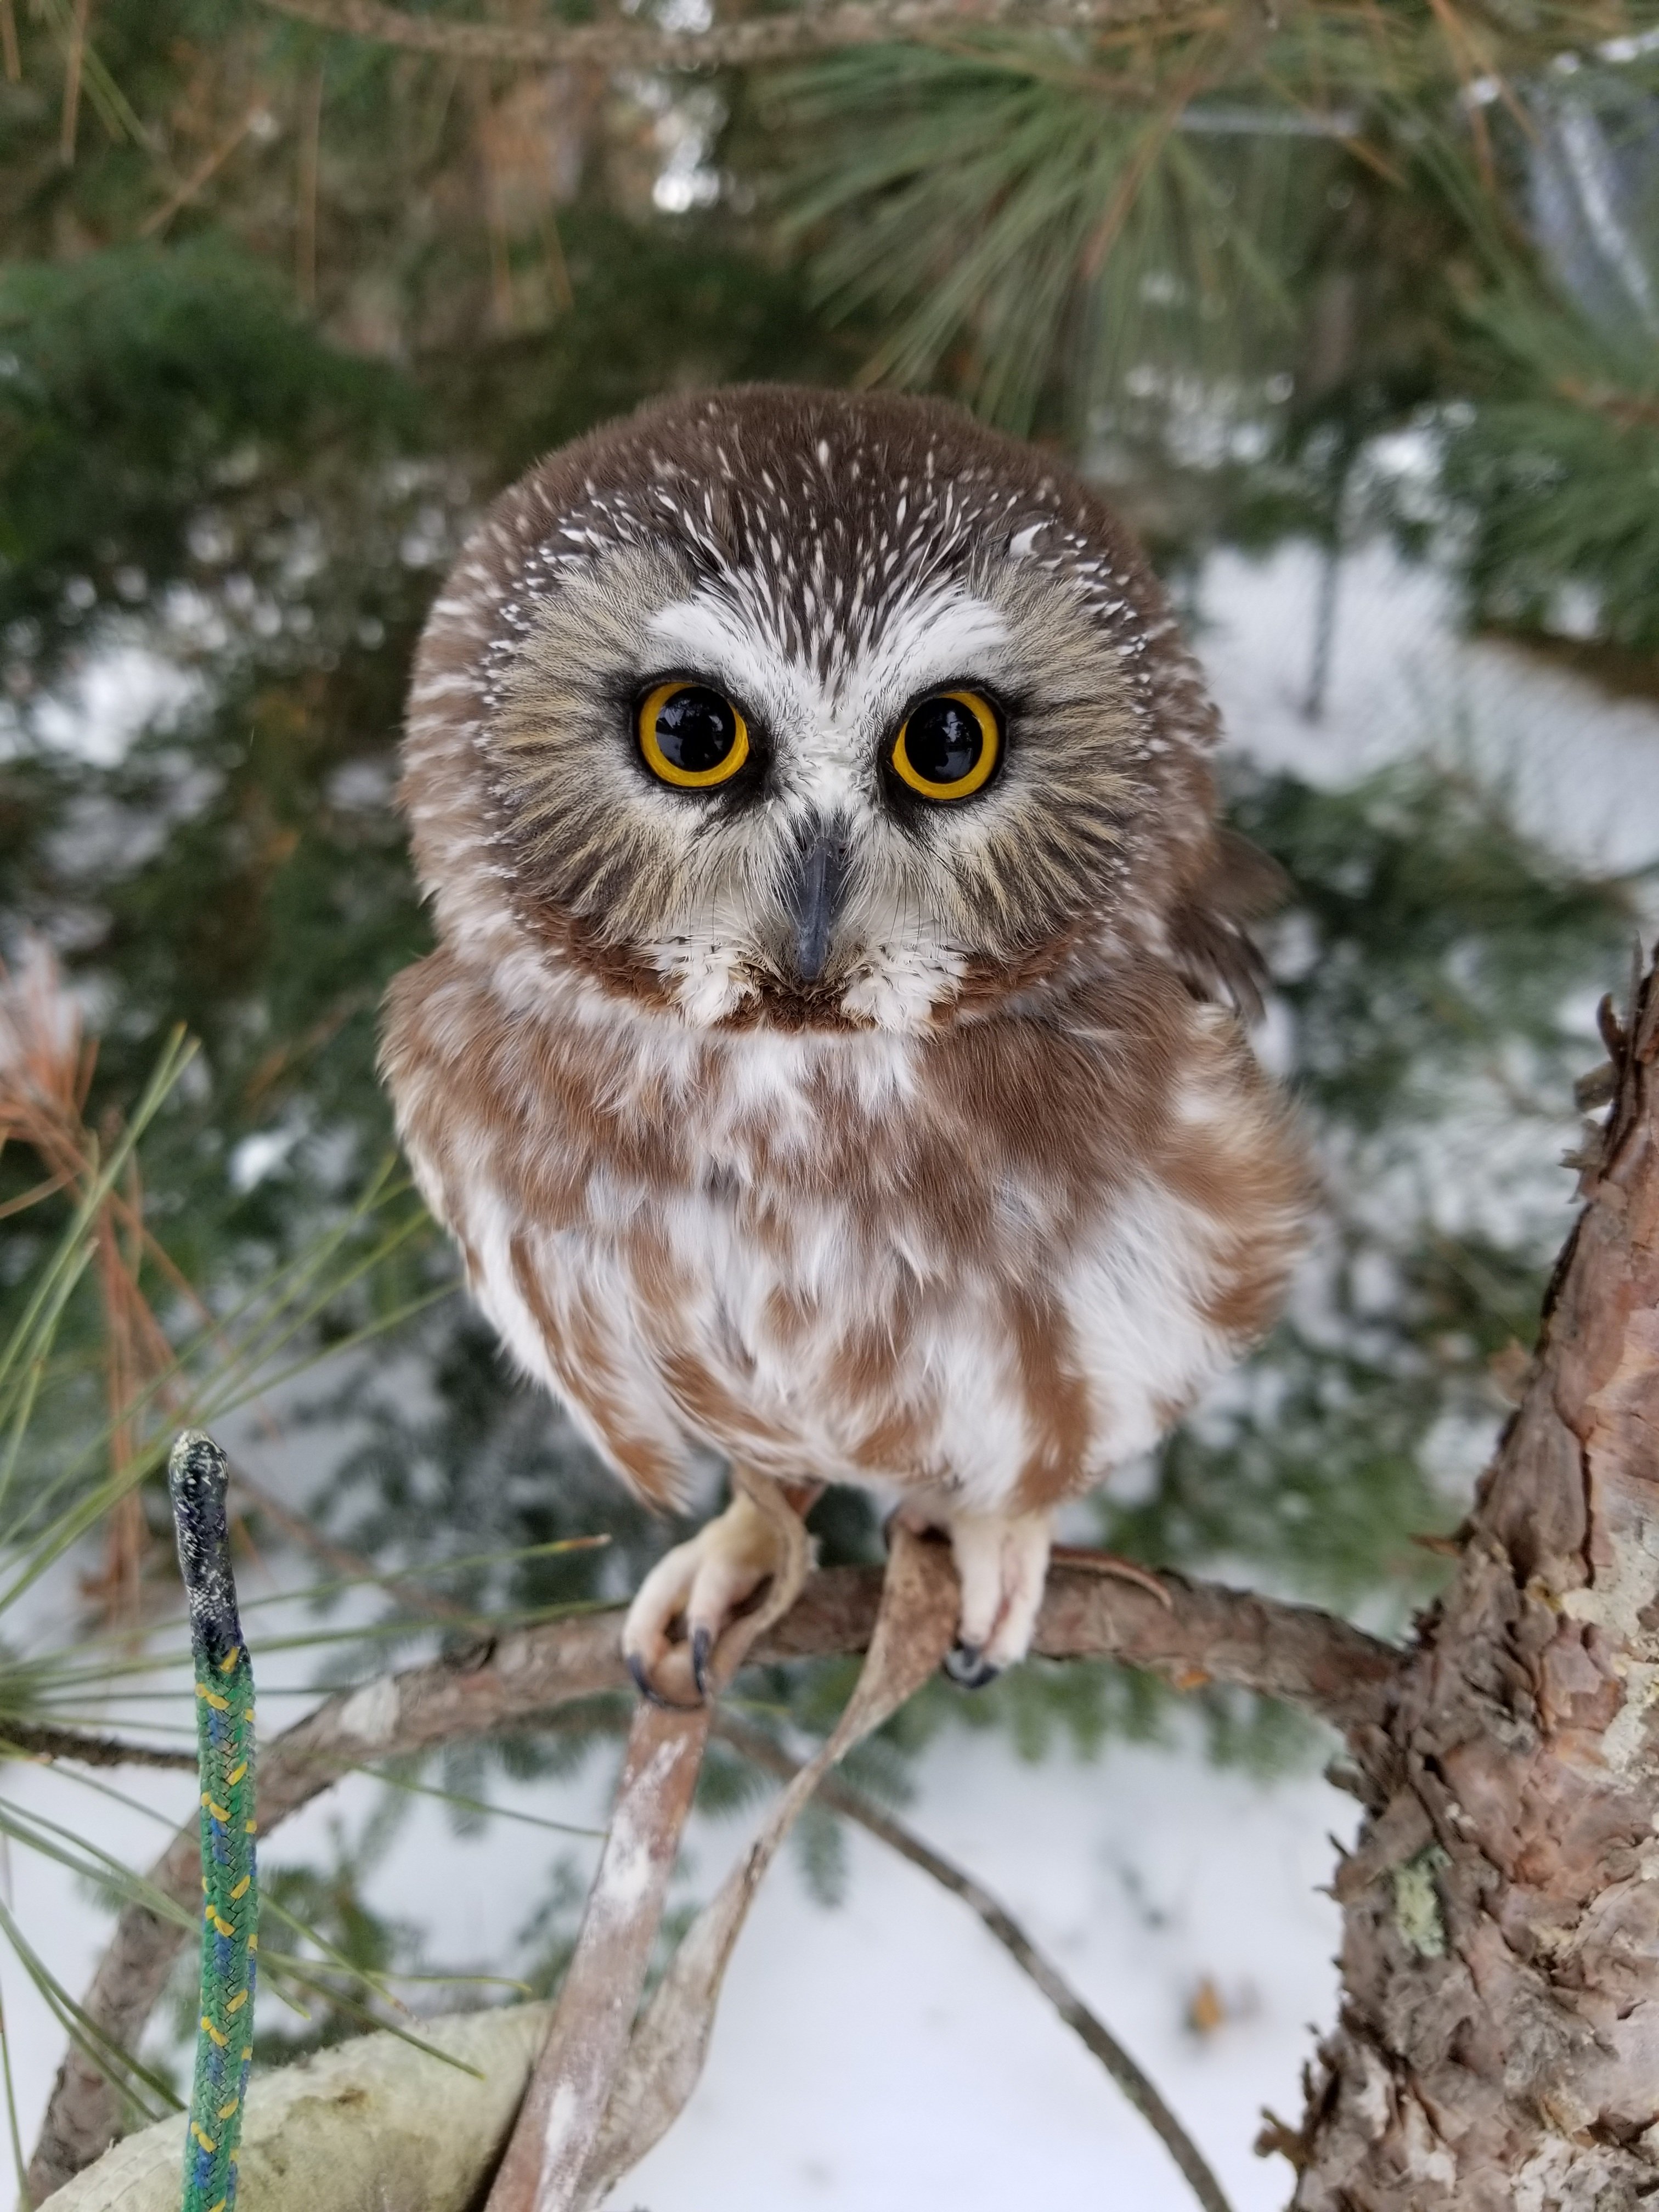 CANCELED Hear, Here? The What and Where of Northern Saw-whet Owl Auditory Processing